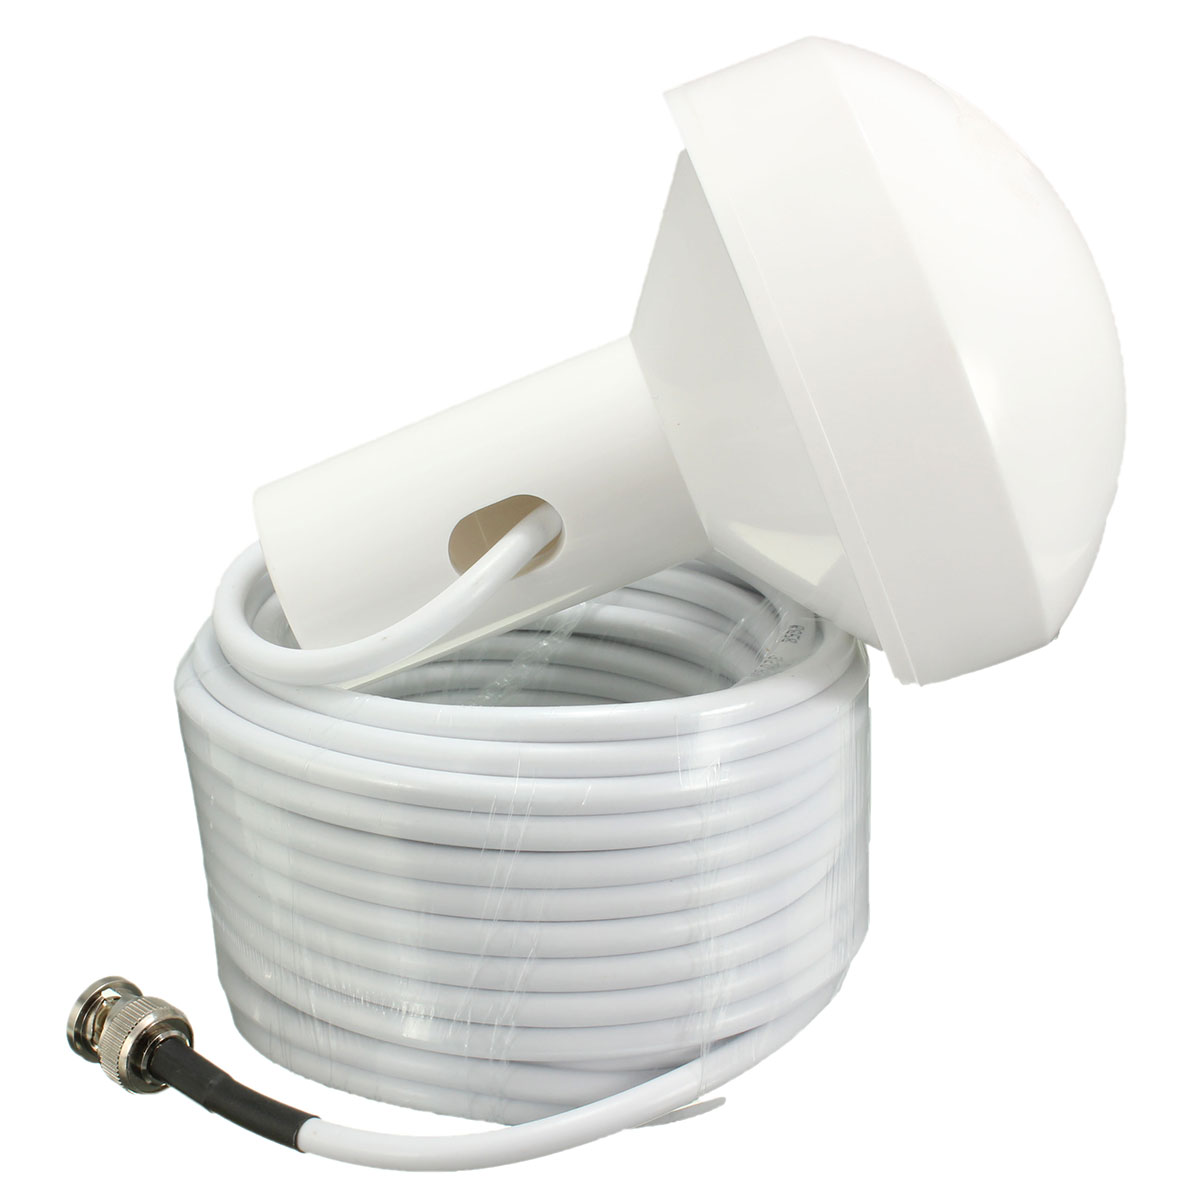 GPS-Active-Marine-Navigation-Antenna-10-Meters-With-BNC-Male-Plug-Connector-New-1019248